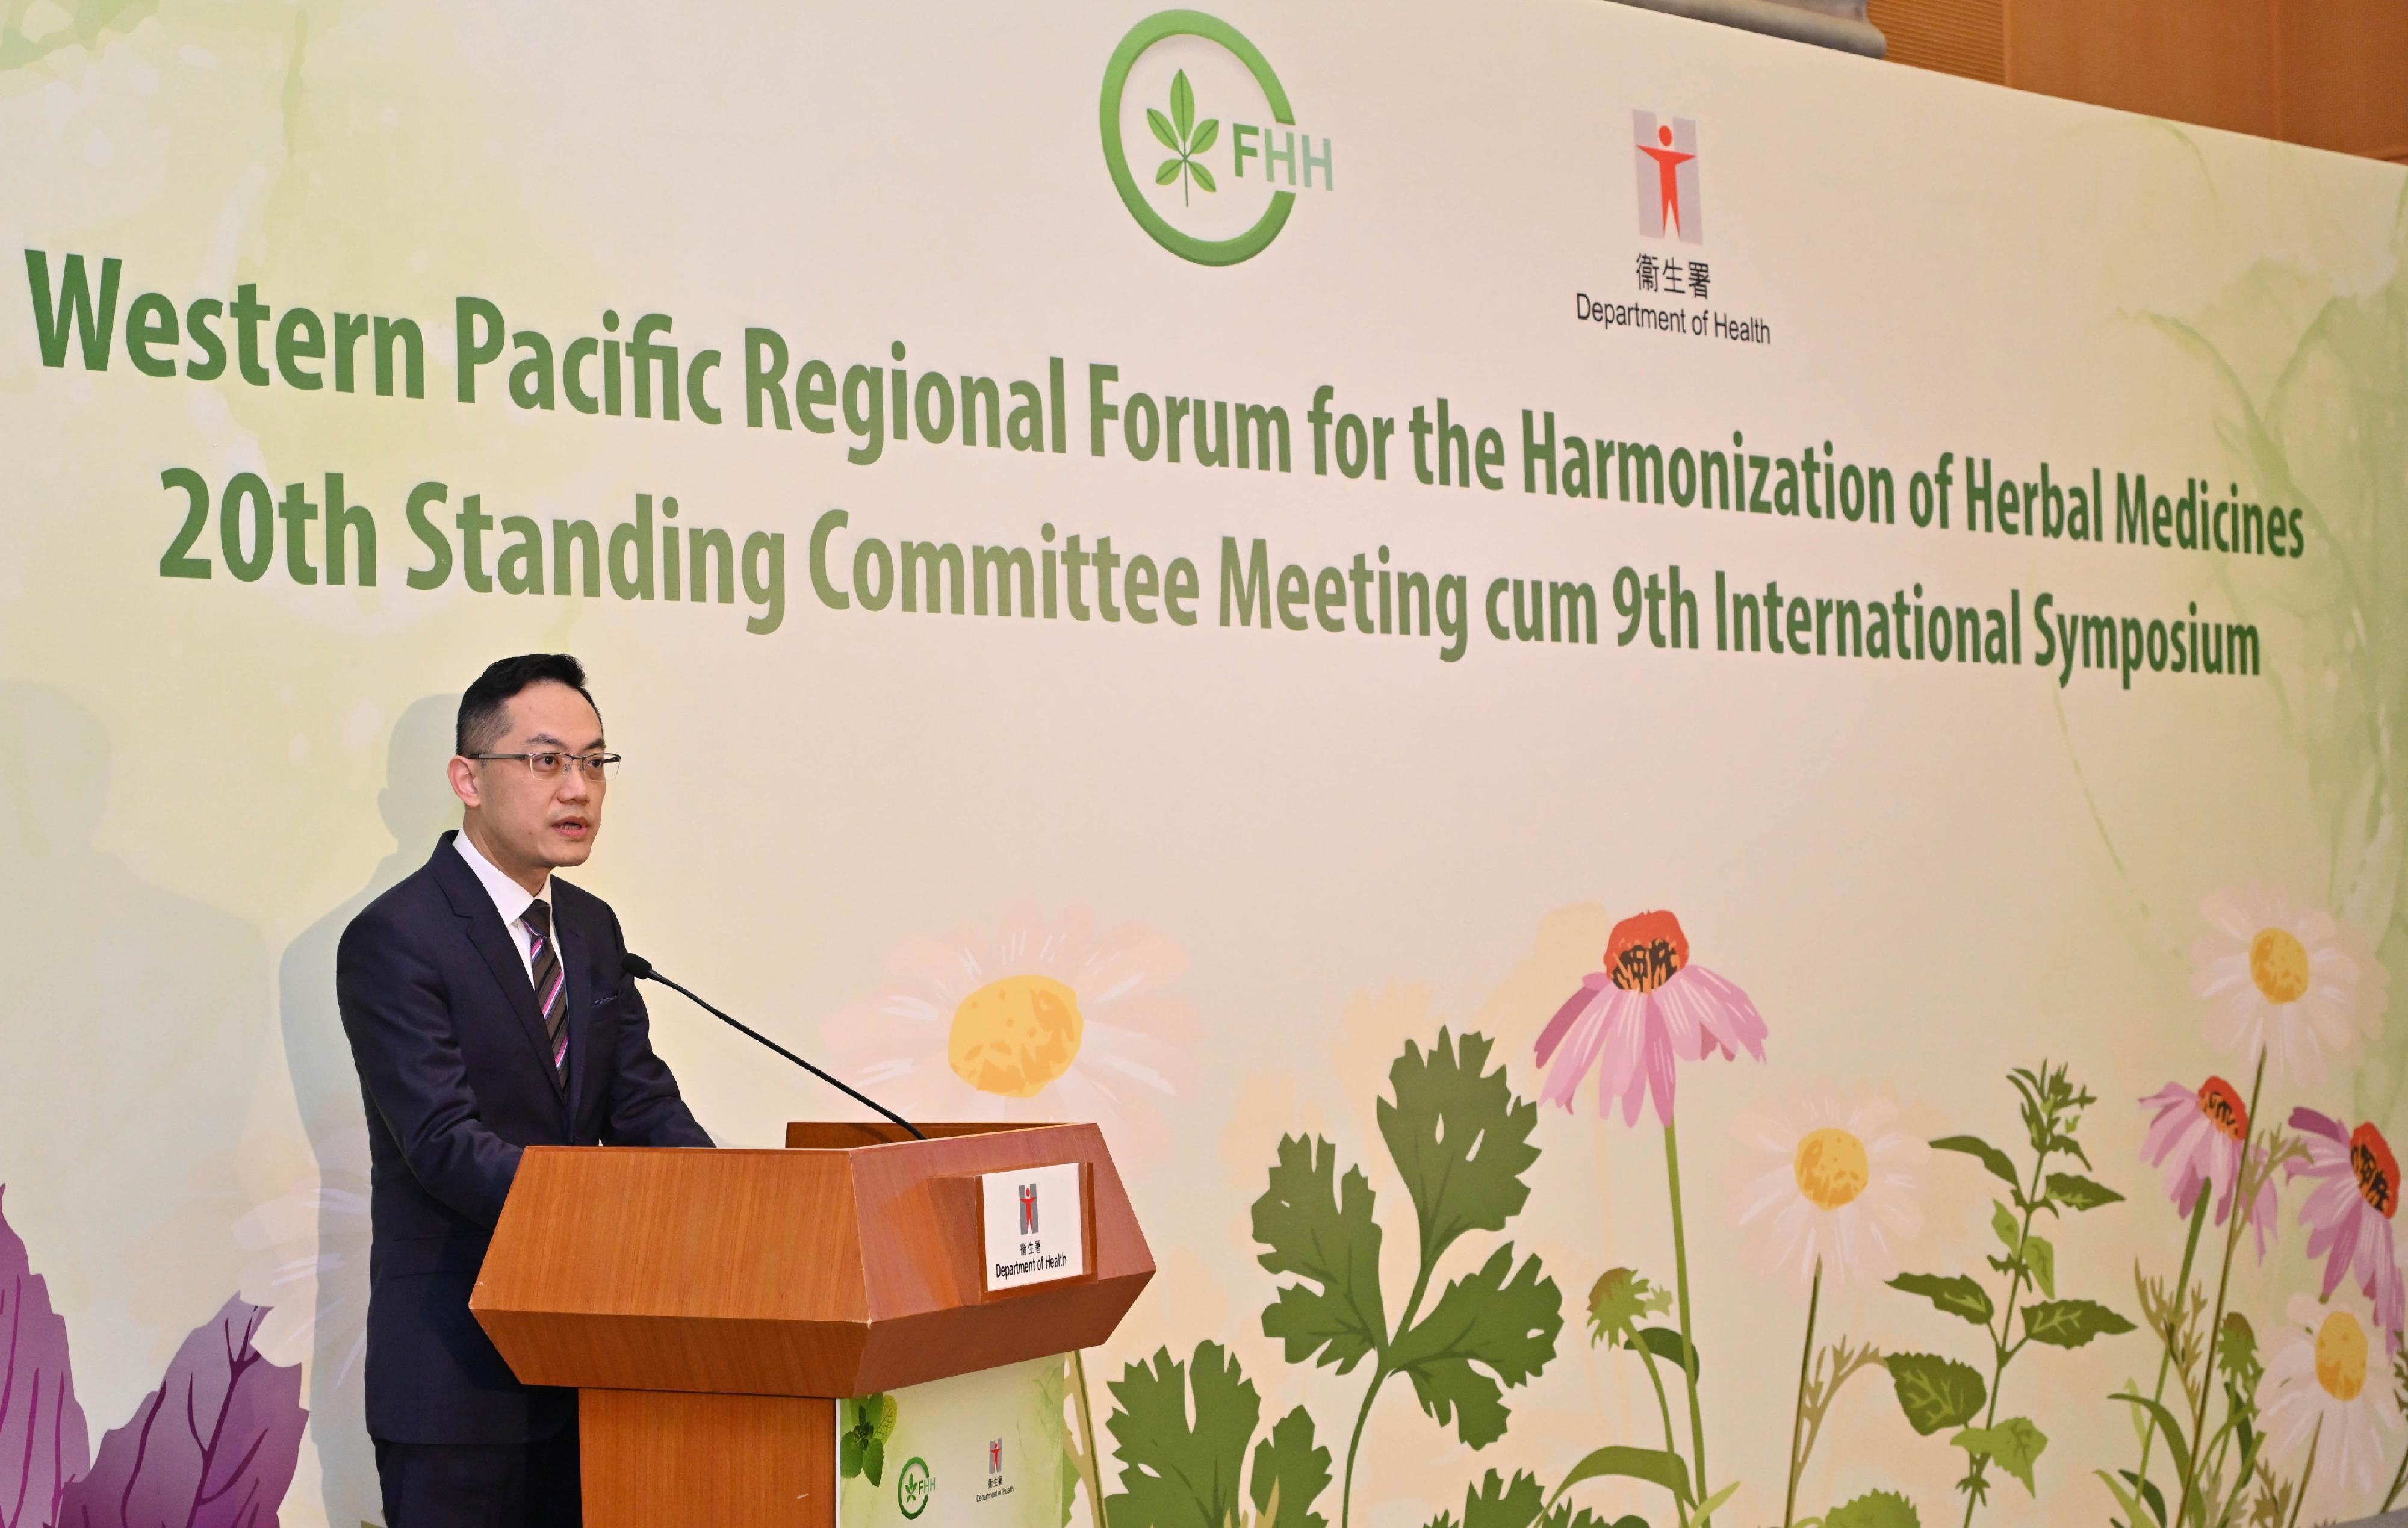 Hosted by the Department of Health, a two-day event comprising the 20th Standing Committee Meeting and the 9th International Symposium of the Western Pacific Regional Forum for the Harmonization of Herbal Medicines, successfully concluded today (February 23). Photo shows the Director of Health, Dr Ronald Lam, addressing the opening session of the Symposium.